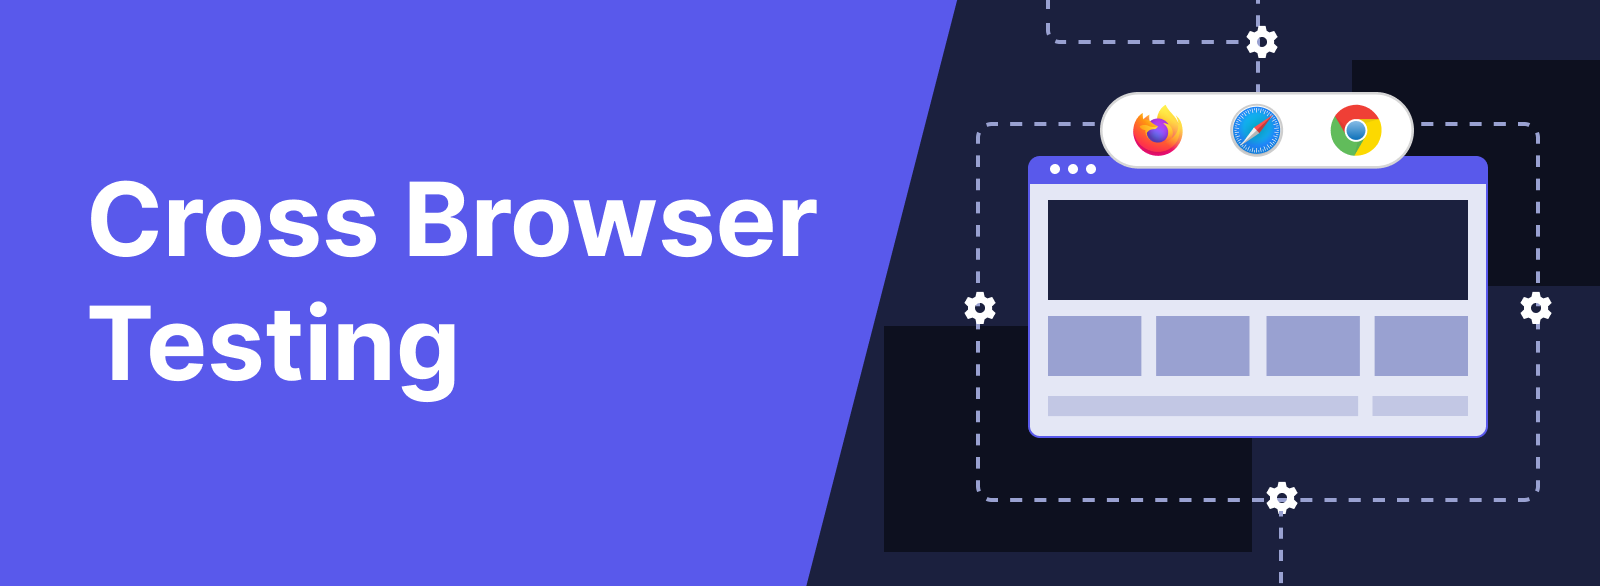 Cross browser testing complete guide